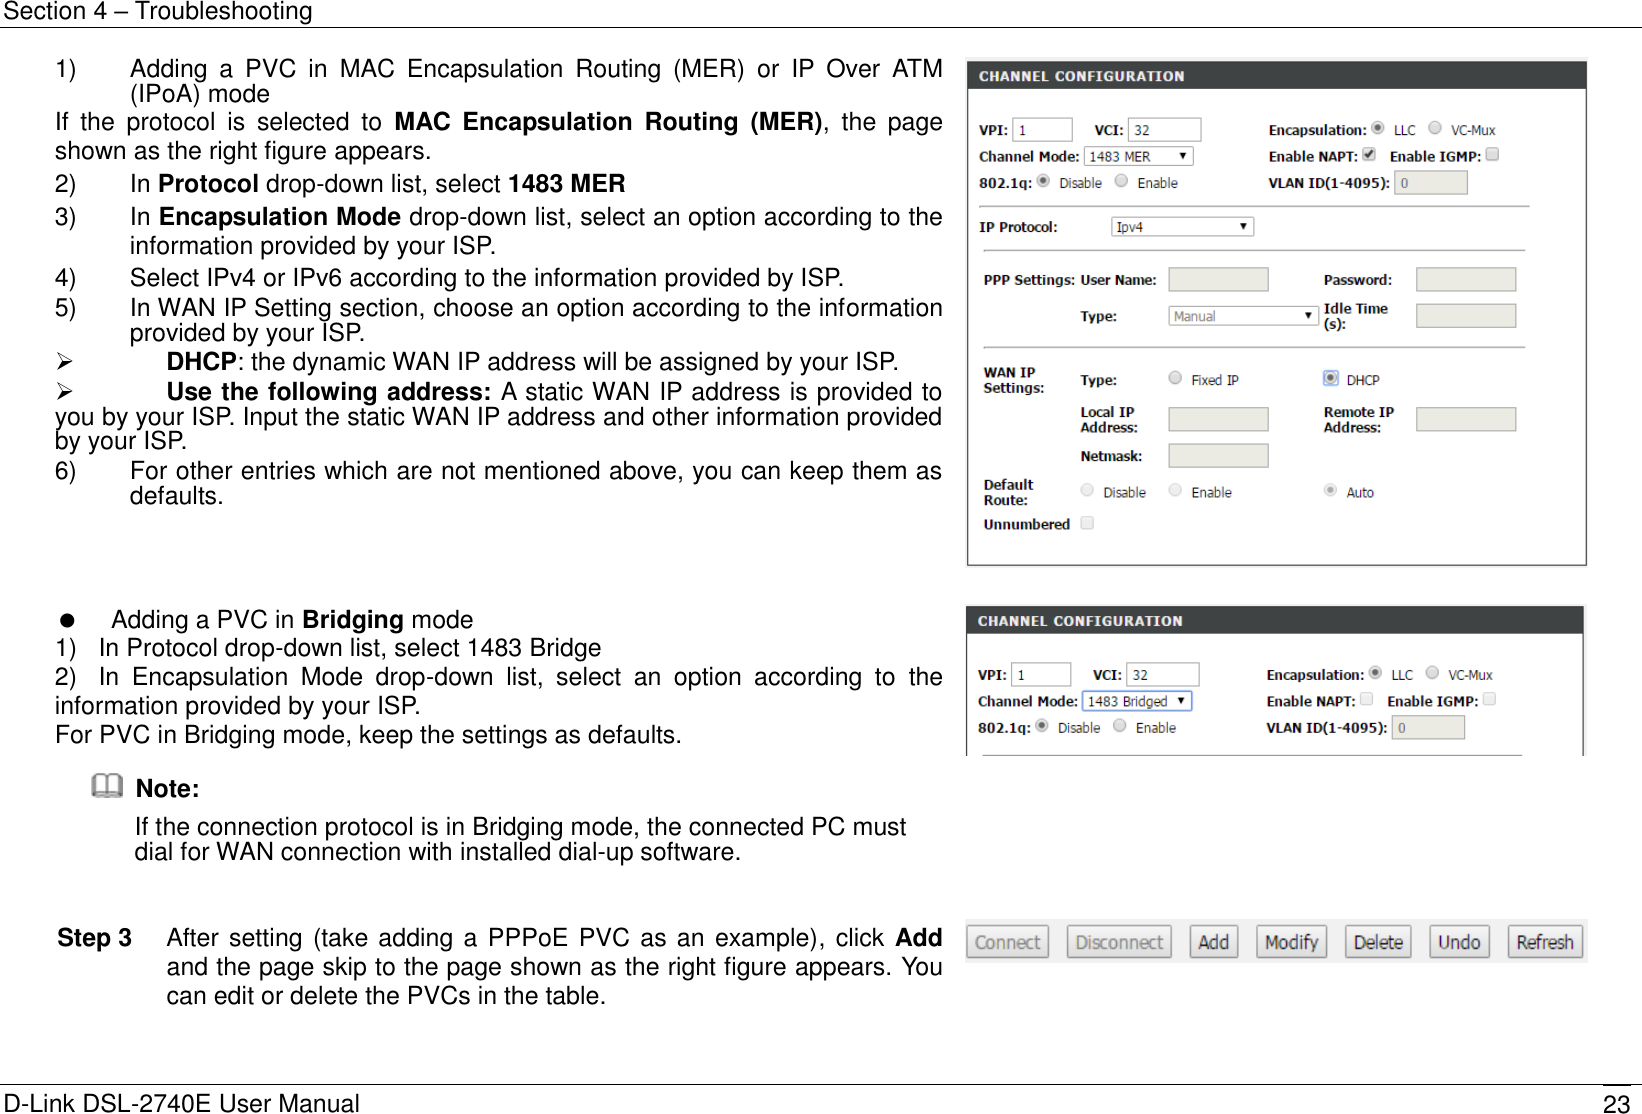 Section 4 – Troubleshooting D-Link DSL-2740E User Manual 23 1)    Adding  a  PVC  in  MAC  Encapsulation  Routing  (MER)  or  IP  Over  ATM (IPoA) mode If  the  protocol  is  selected  to  MAC  Encapsulation  Routing  (MER),  the  page shown as the right figure appears. 2)    In Protocol drop-down list, select 1483 MER   3)    In Encapsulation Mode drop-down list, select an option according to the information provided by your ISP. 4)    Select IPv4 or IPv6 according to the information provided by ISP. 5)    In WAN IP Setting section, choose an option according to the information provided by your ISP.  DHCP: the dynamic WAN IP address will be assigned by your ISP.  Use the following address: A static WAN IP address is provided to you by your ISP. Input the static WAN IP address and other information provided by your ISP. 6)    For other entries which are not mentioned above, you can keep them as defaults.       Adding a PVC in Bridging mode 1)   In Protocol drop-down list, select 1483 Bridge   2)   In  Encapsulation  Mode  drop-down  list,  select  an  option  according  to  the information provided by your ISP. For PVC in Bridging mode, keep the settings as defaults.   Note: If the connection protocol is in Bridging mode, the connected PC must dial for WAN connection with installed dial-up software.   Step 3  After setting (take adding a PPPoE PVC as an example), click Add and the page skip to the page shown as the right figure appears. You can edit or delete the PVCs in the table.  